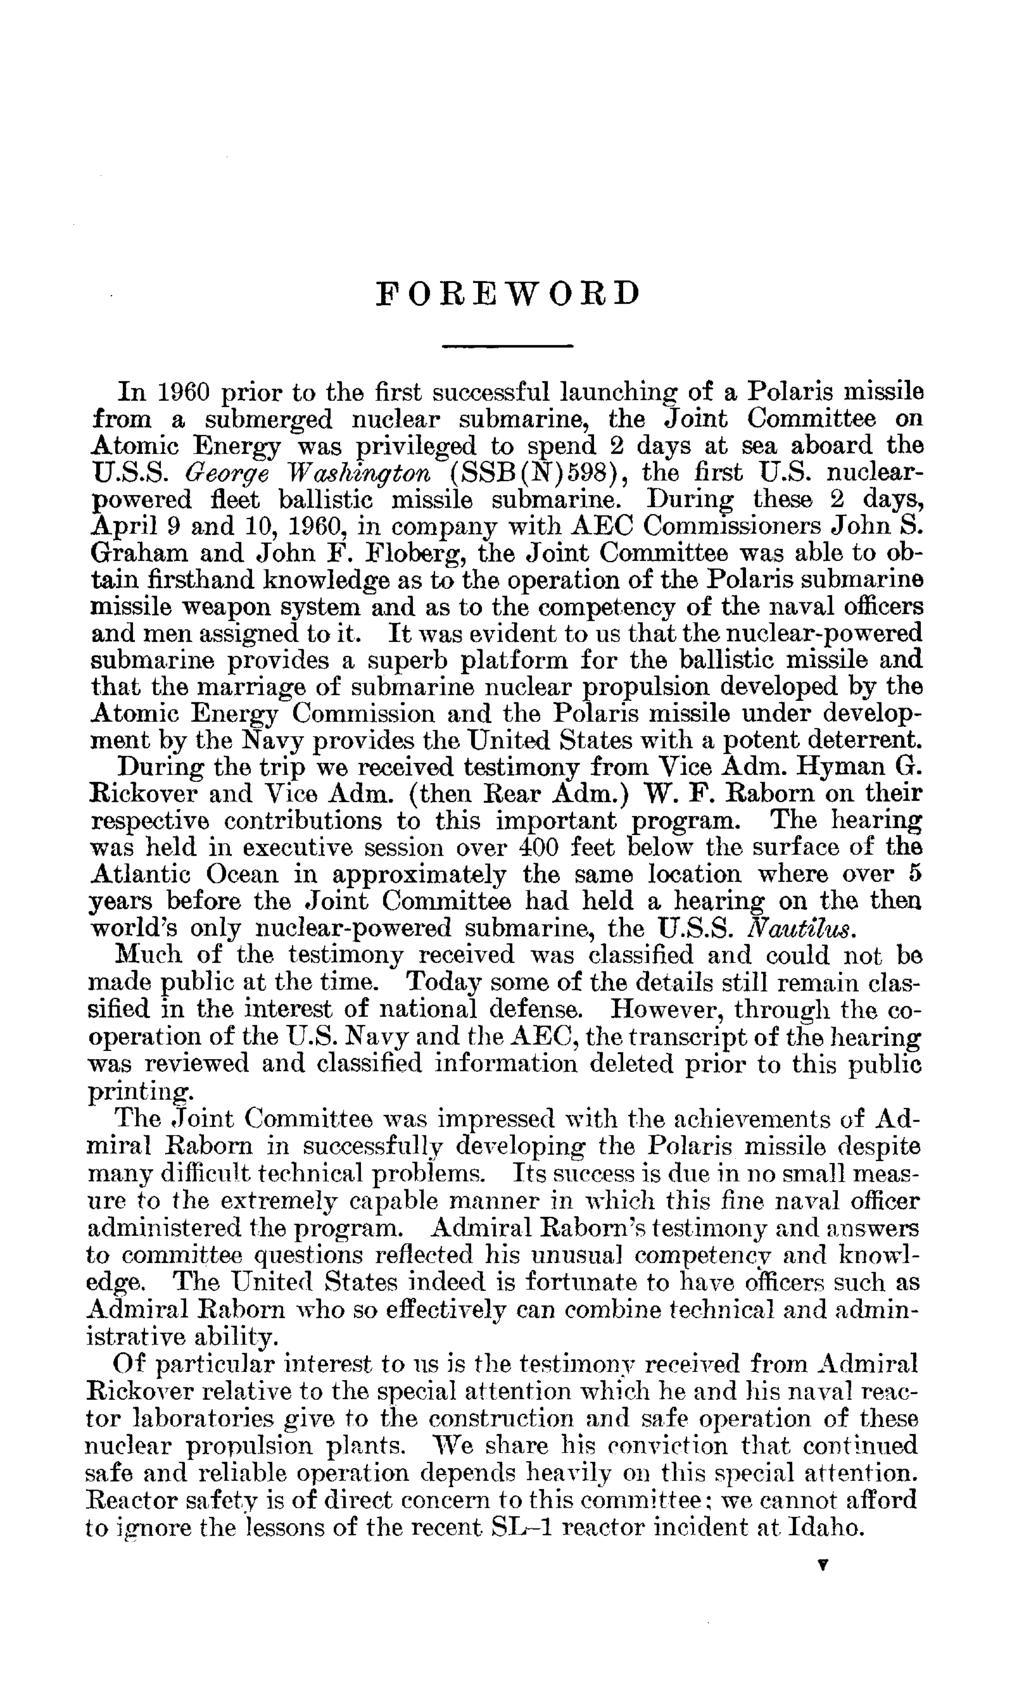 FOREWORD In 1960 prior to the first successful launching of a Polaris missile from a submerged nuclear submarine, the Joint Committee on Atomic Energy was privileged to spend 2 days at sea aboard the